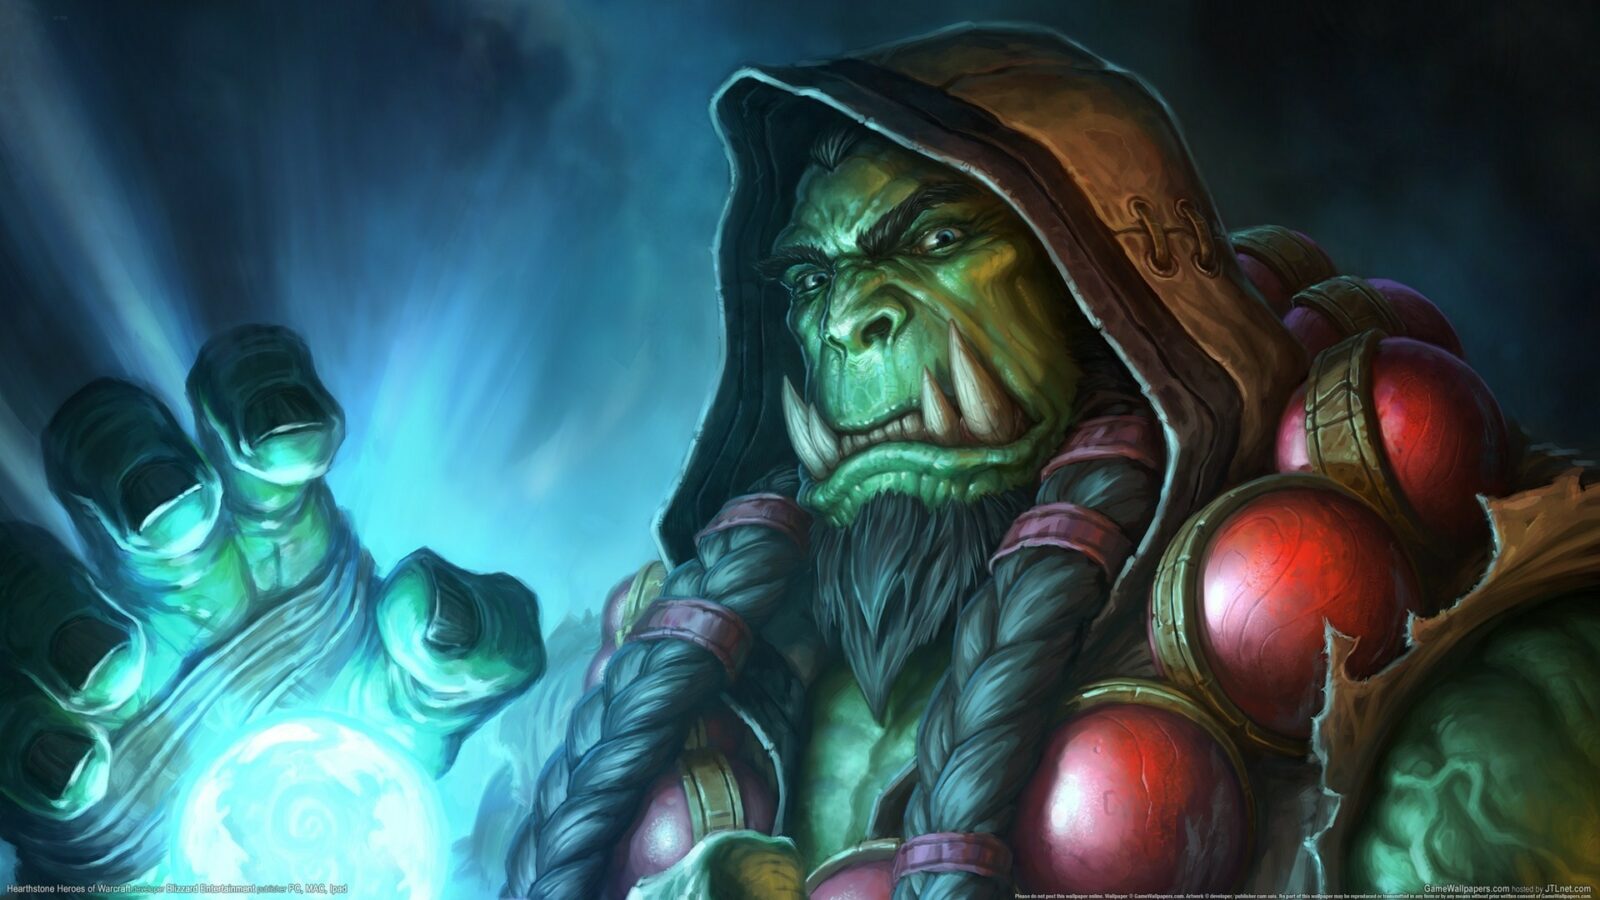 illustration comics Hearthstone Shaman Thrall games screenshot computer wallpaper special effects pc game 586068